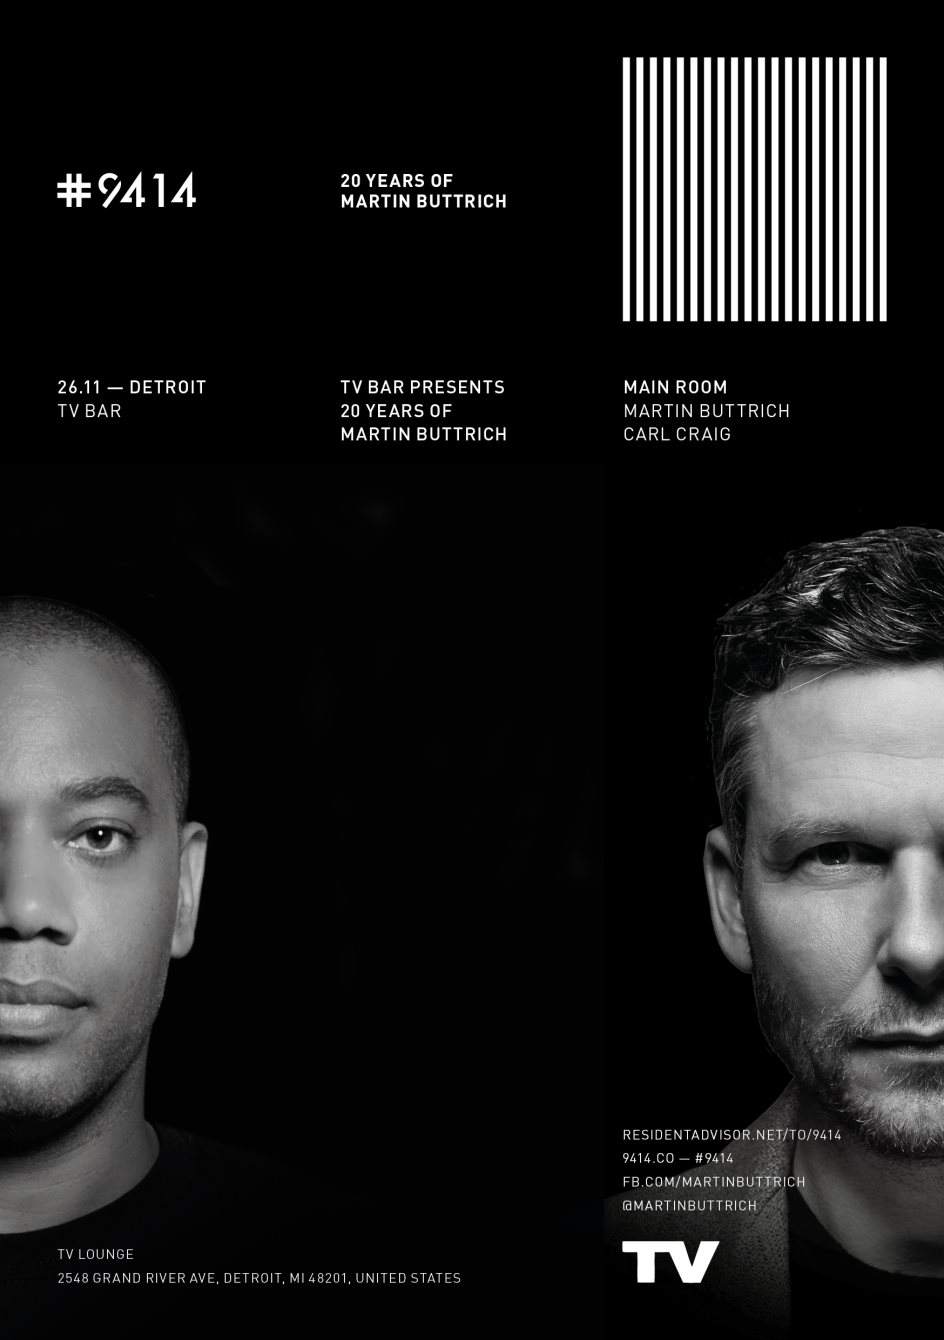 #9414 20 Years of Martin Buttrich Tour with Carl Craig - Página frontal